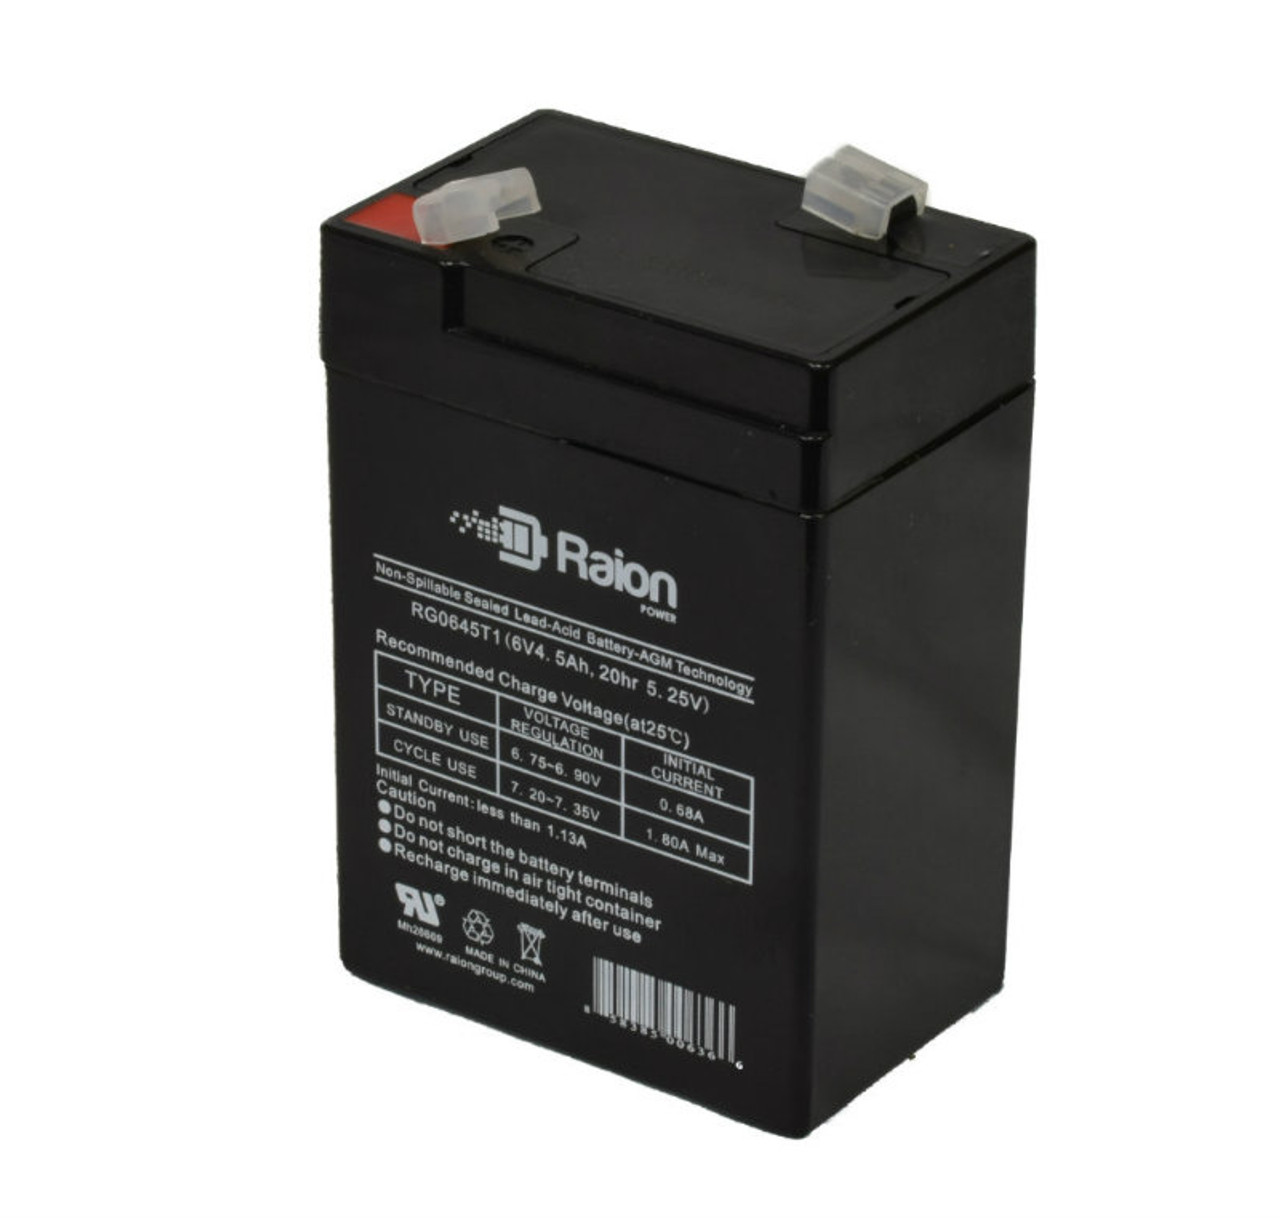 Raion Power RG0645T1 6V 4.5Ah Replacement Battery Cartridge for Taico TP6-4